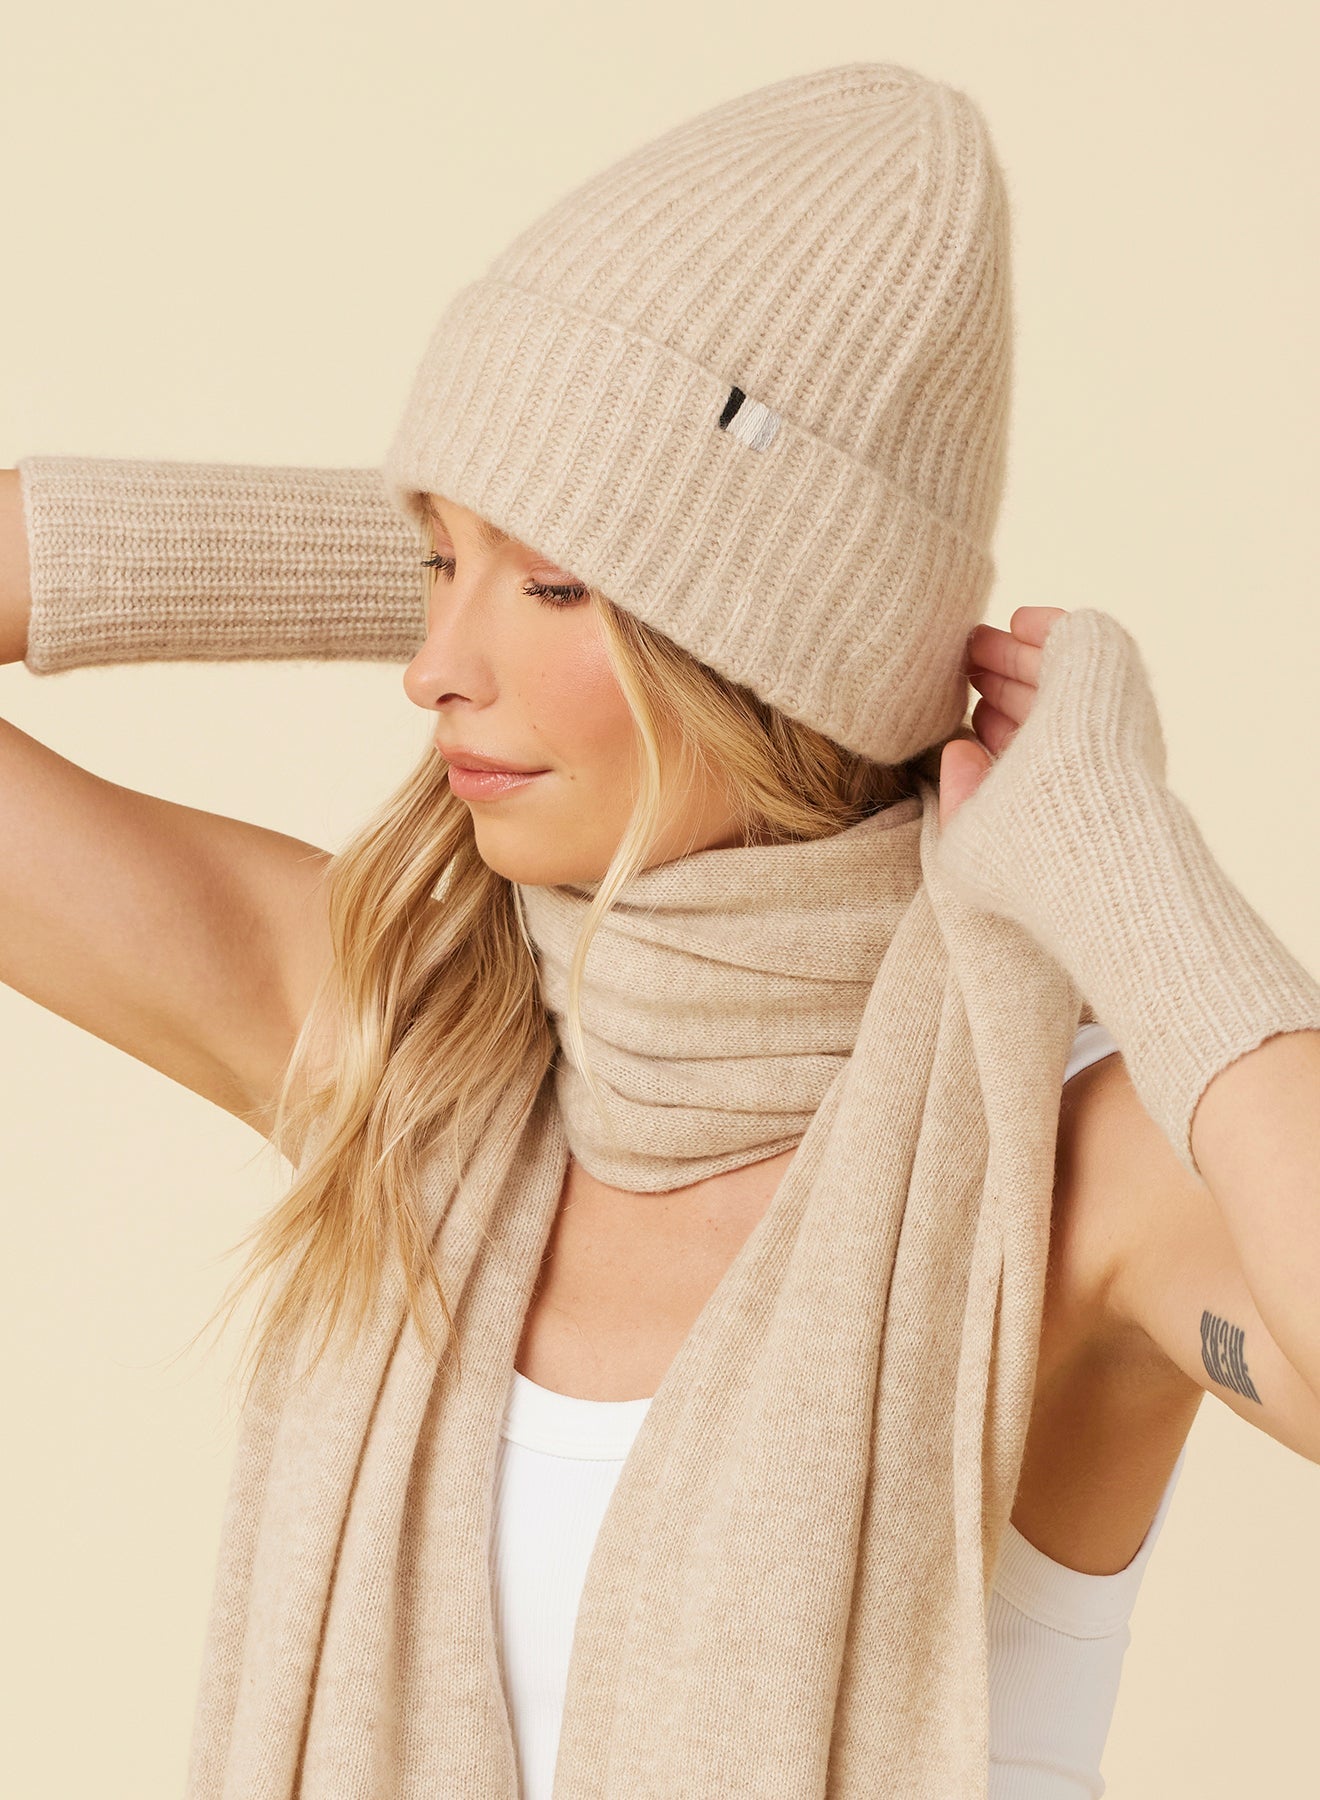 One Grey Day Pacific Cashmere Beanie in Oatmeal